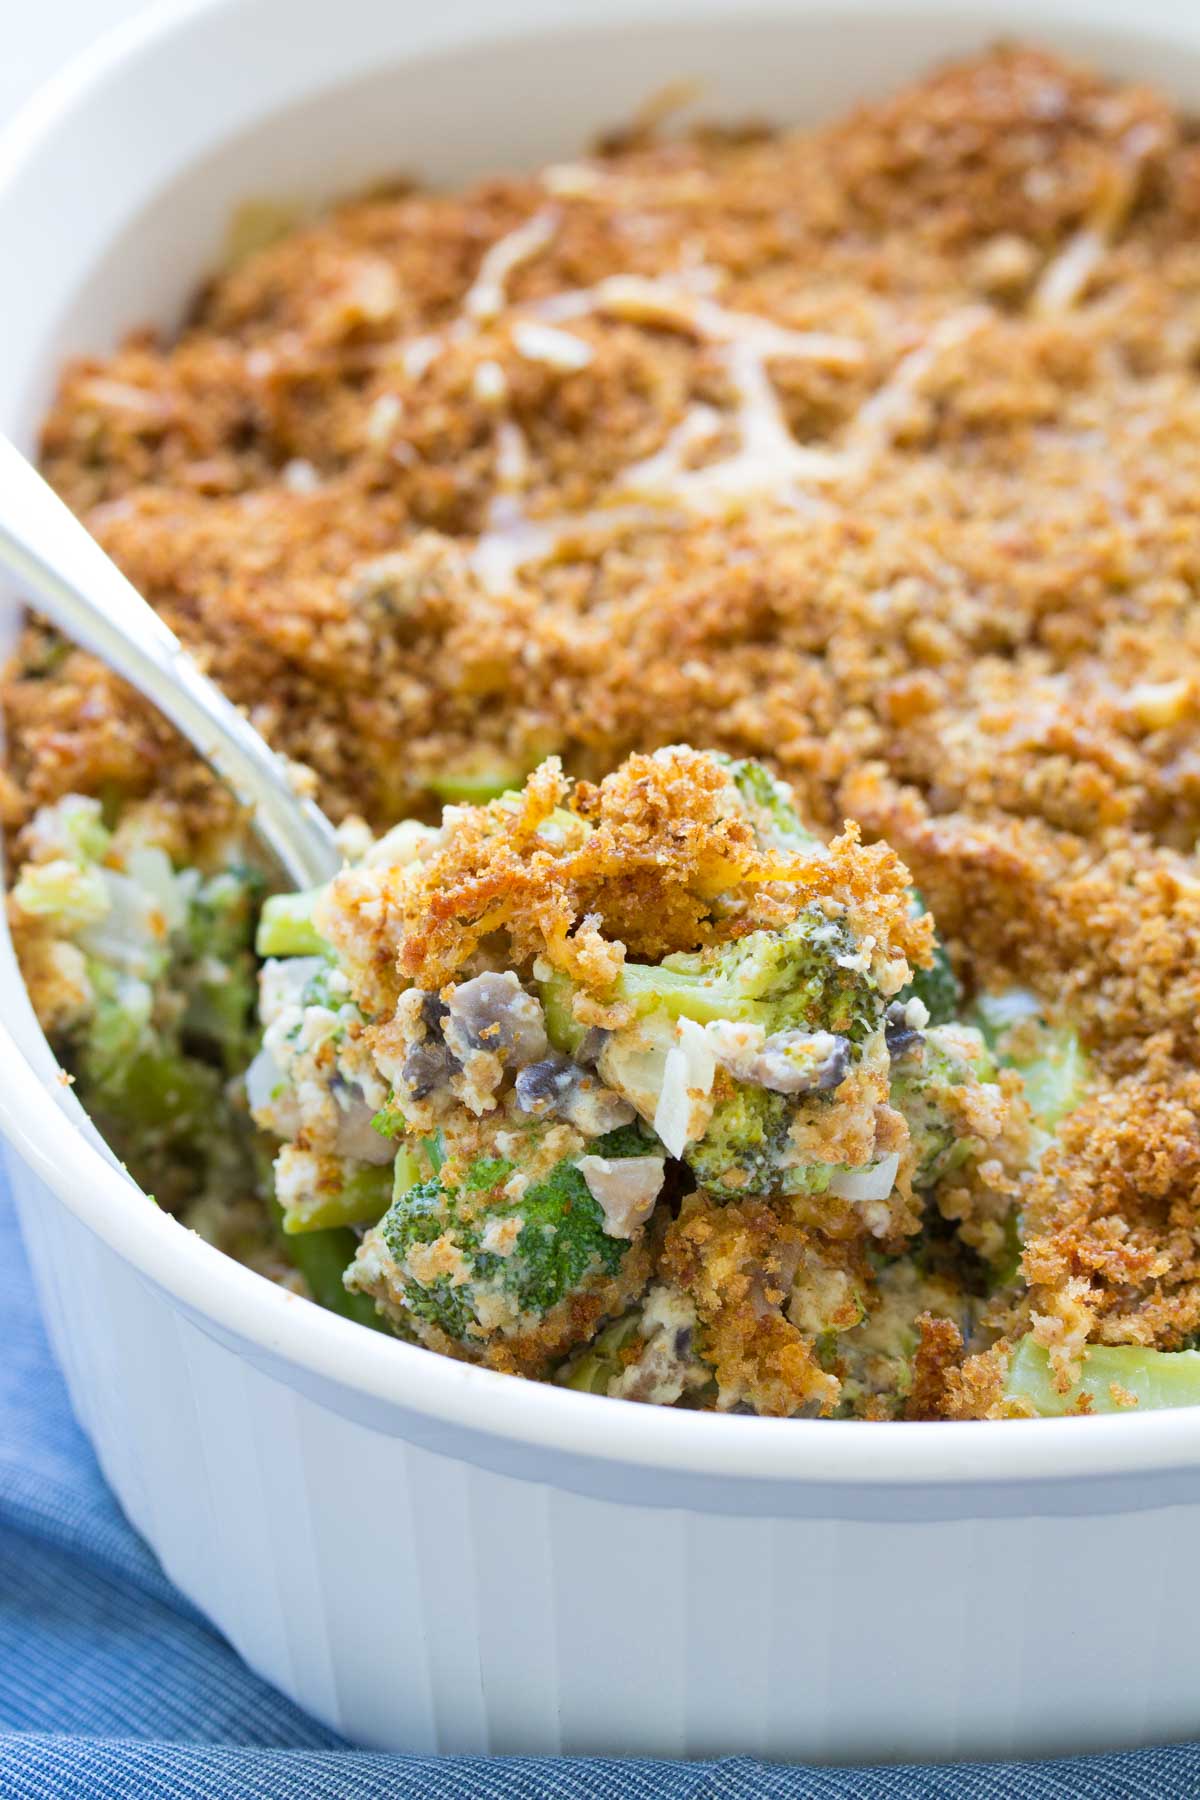 Broccoli casserole in baking dish with serving spoon.